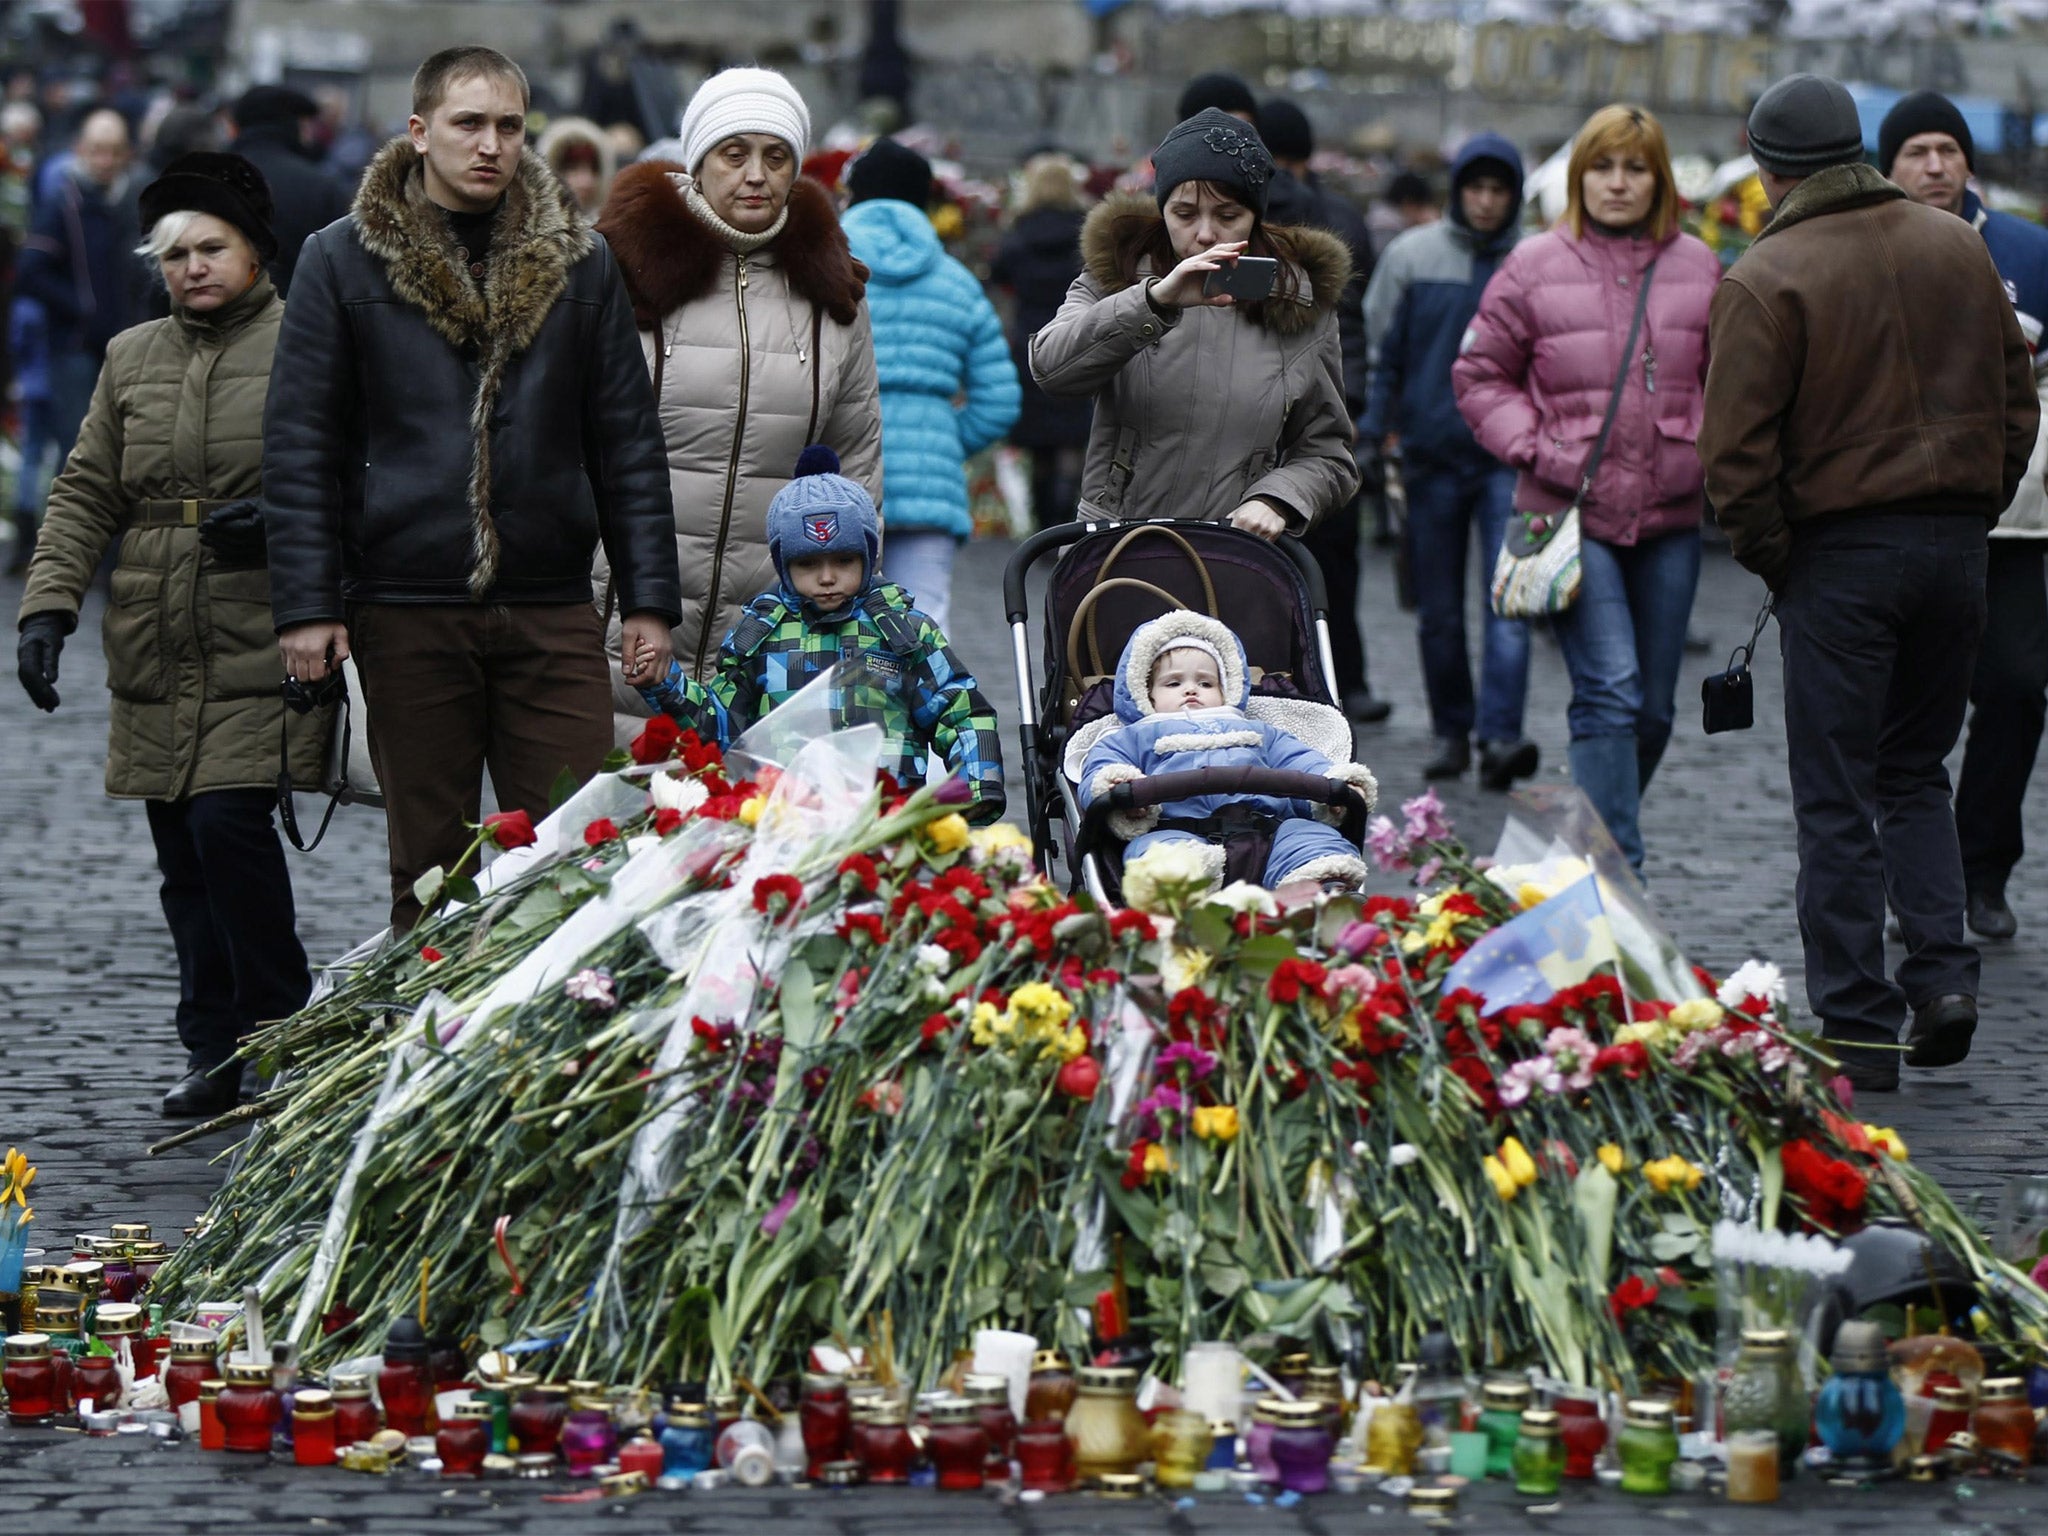 People walk past a makeshift memorial for those killed in recent violence in Kiev